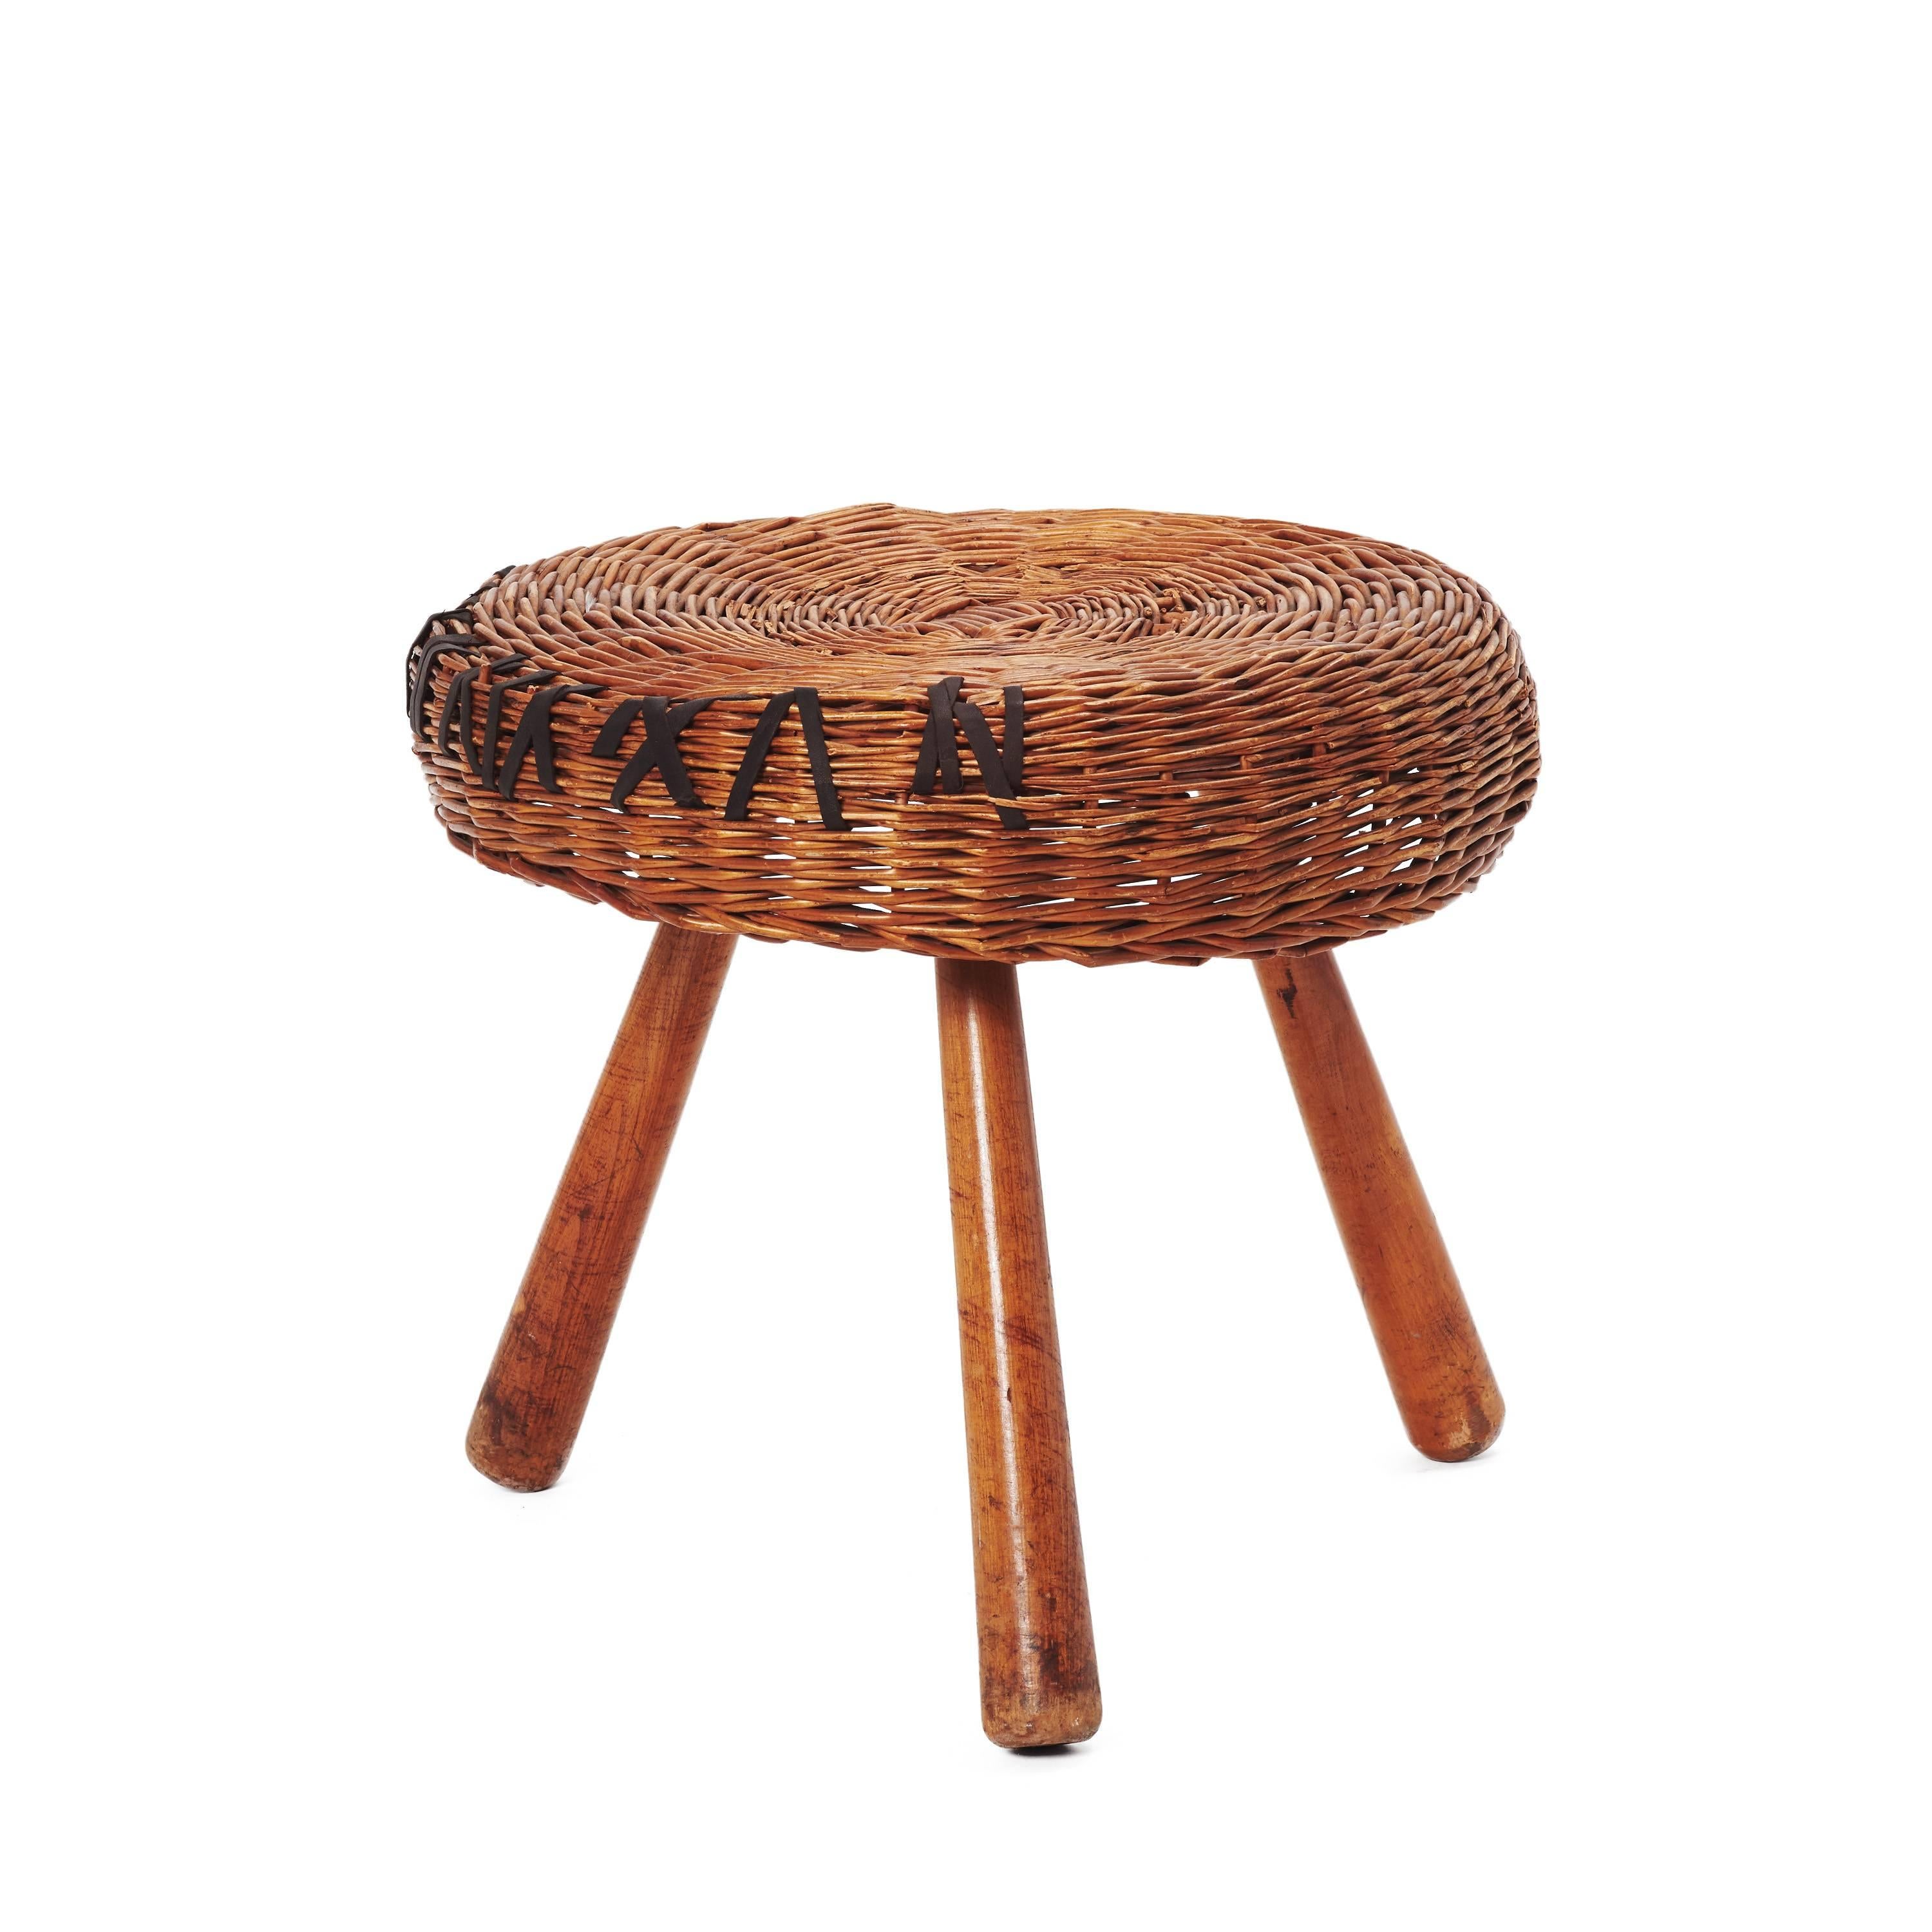 Wicker stool designed by Tony Paul, circa 1950. Manufactured in Netherlands. Walnut wooden legs, rattan seat. Natural patina on legs. Reinforced with chocolate brown leather.